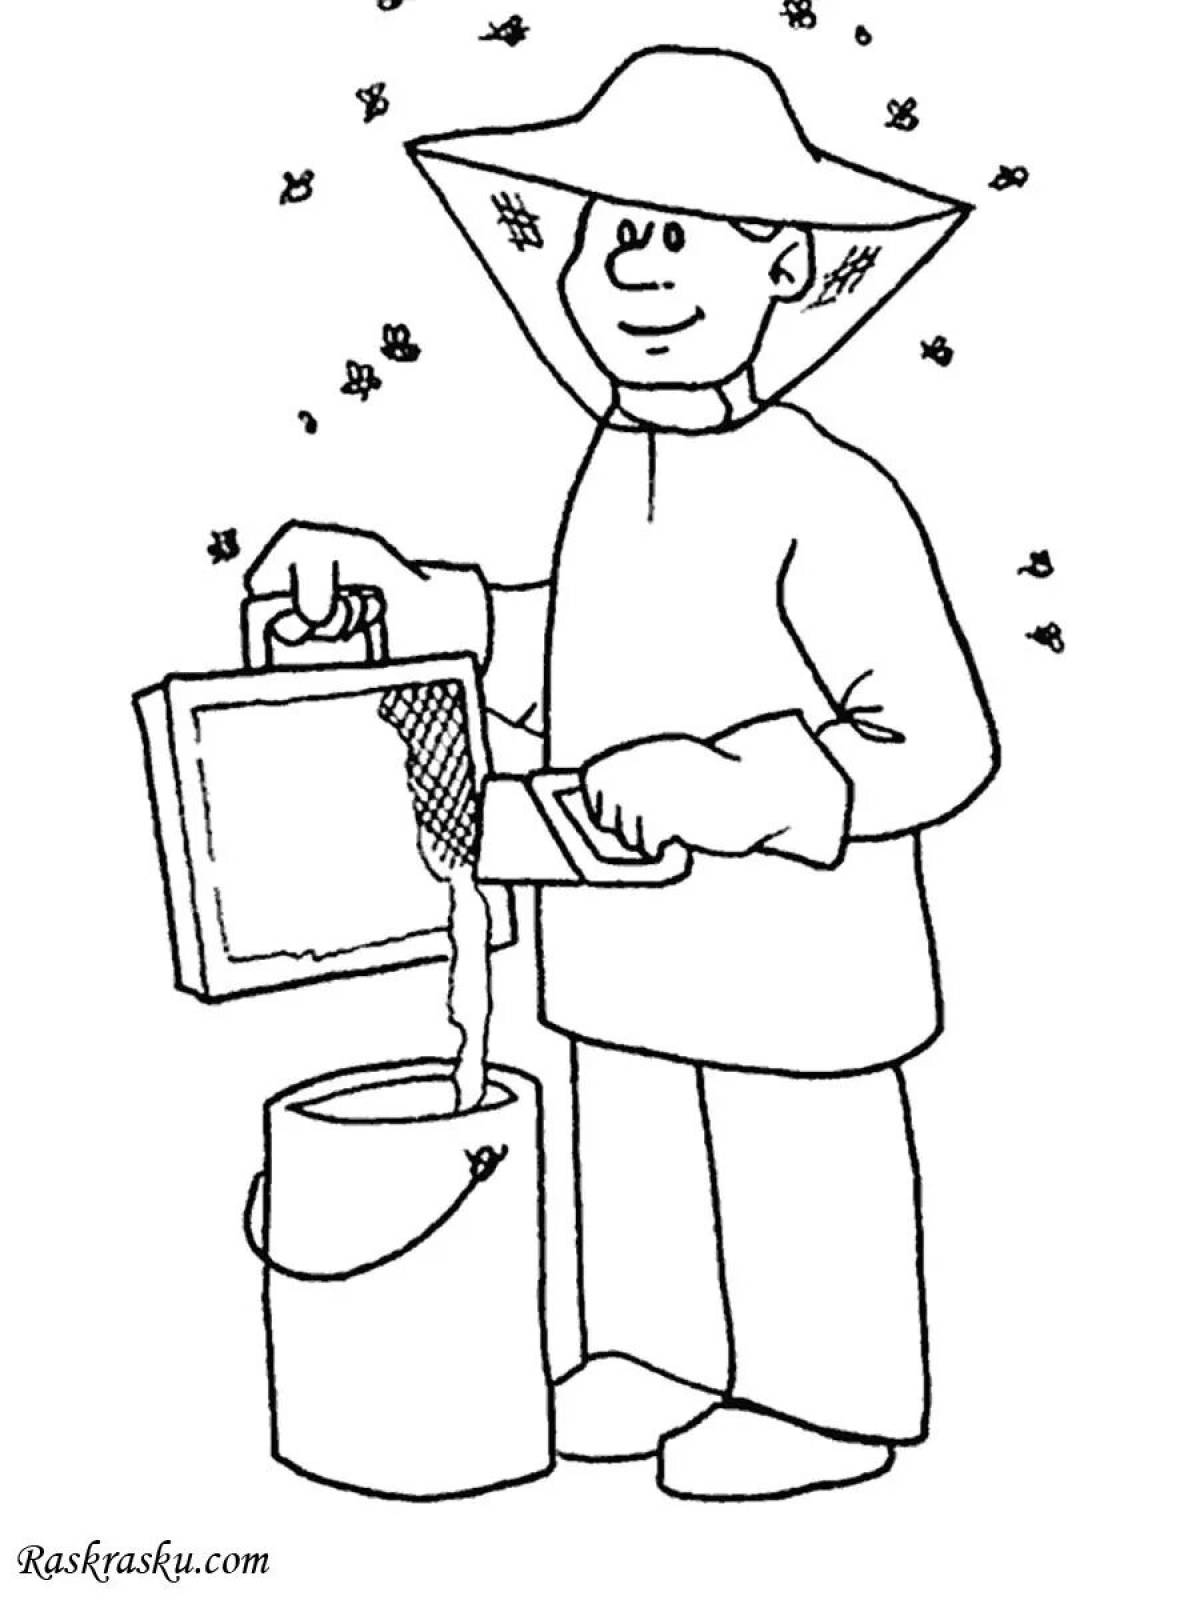 Glitter beekeeper coloring page